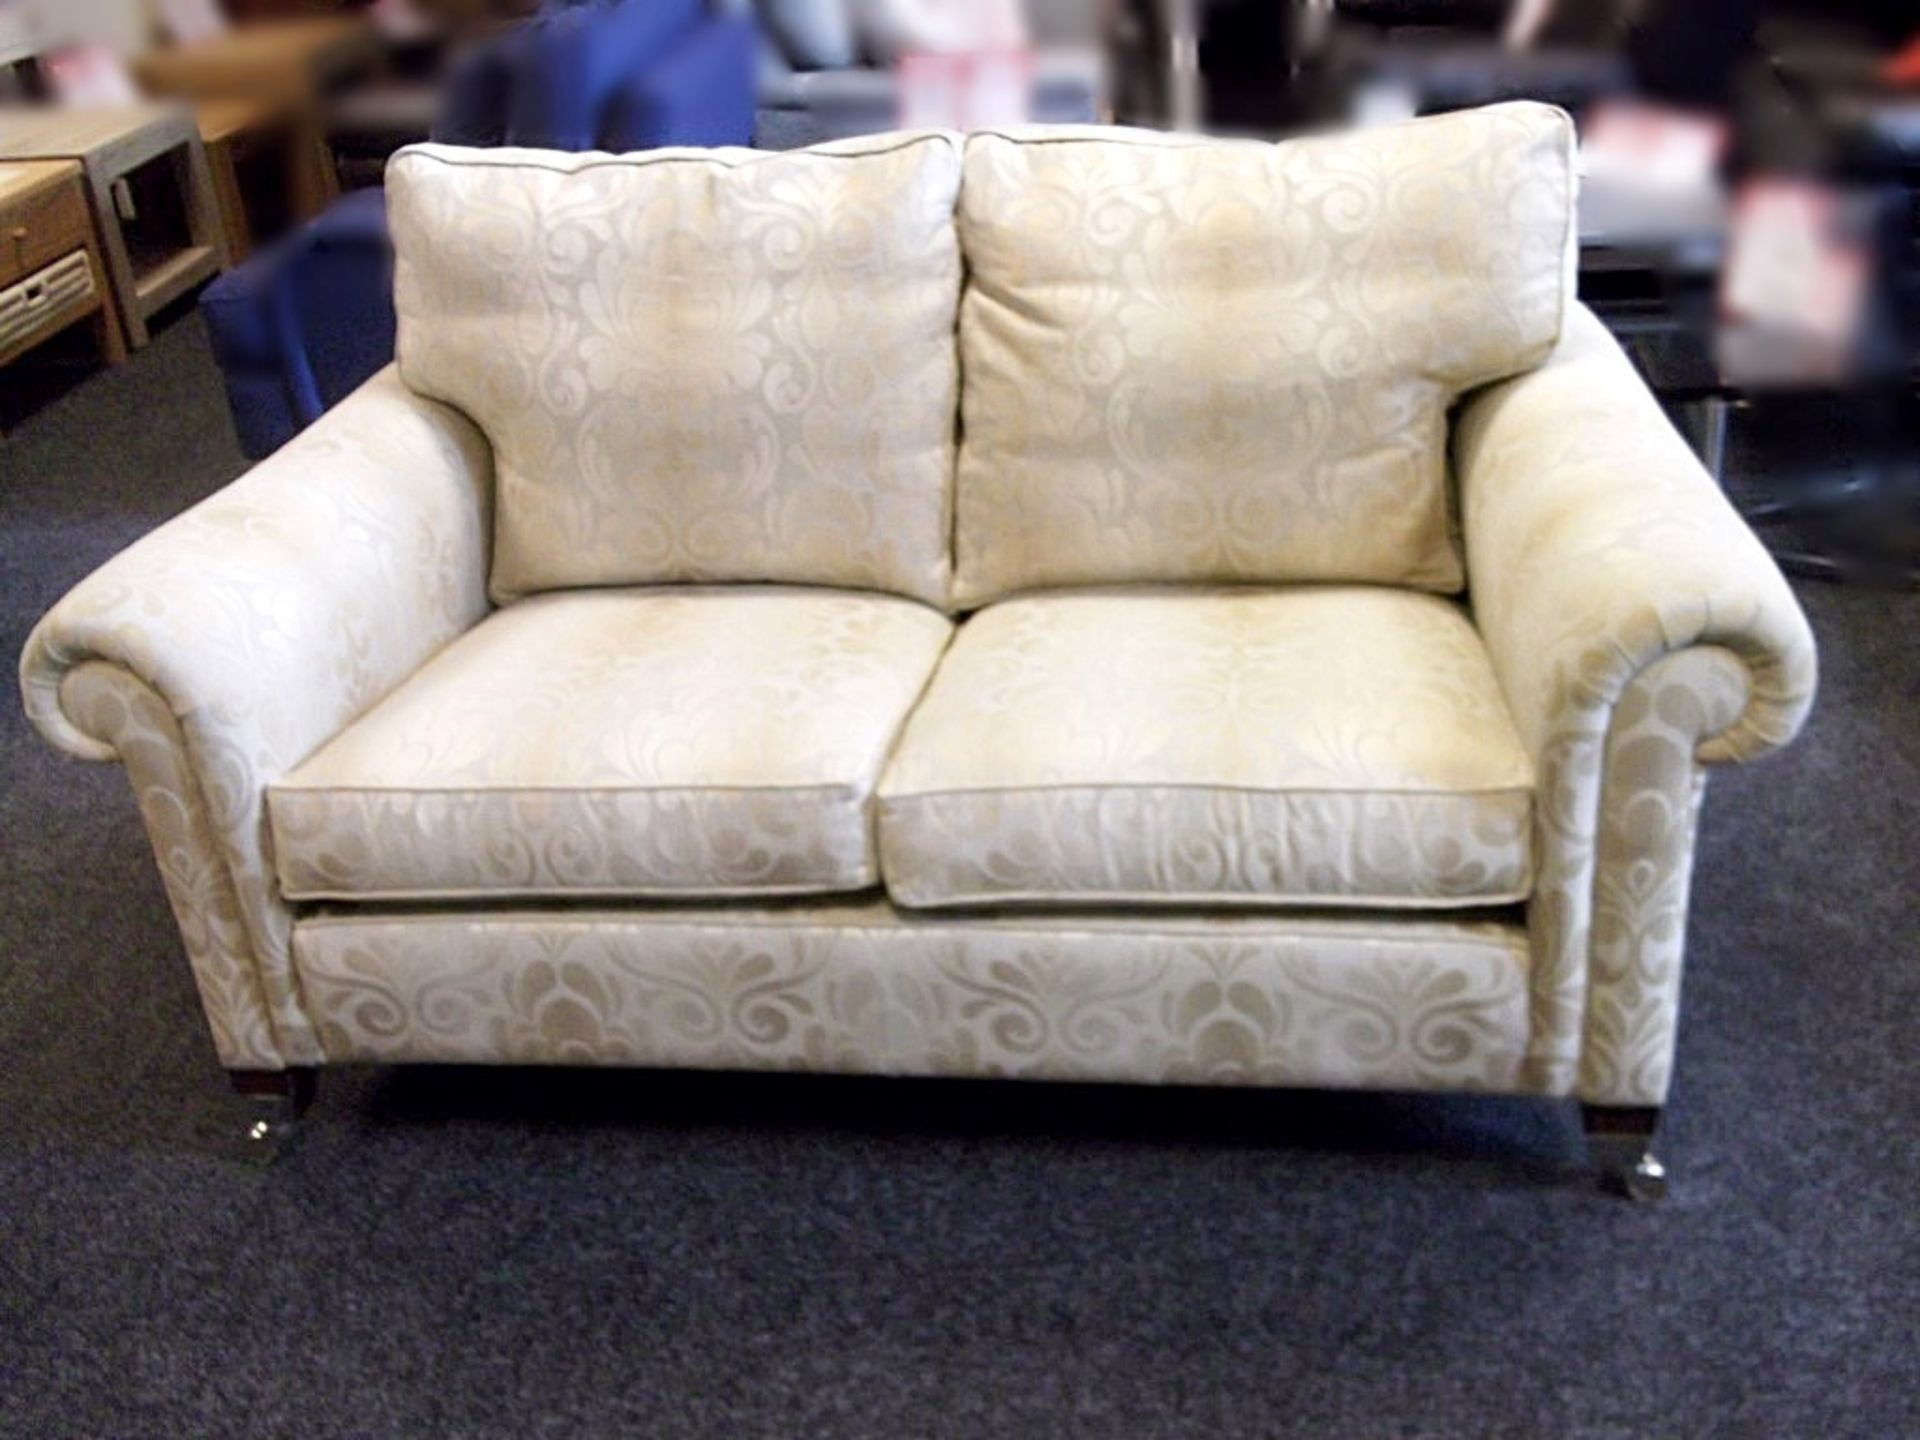 1 x DURESTA 'Portsmouth' 2-Seater Sofa - Ex Display Stock In Great Condition – CL156 - Dimensions: